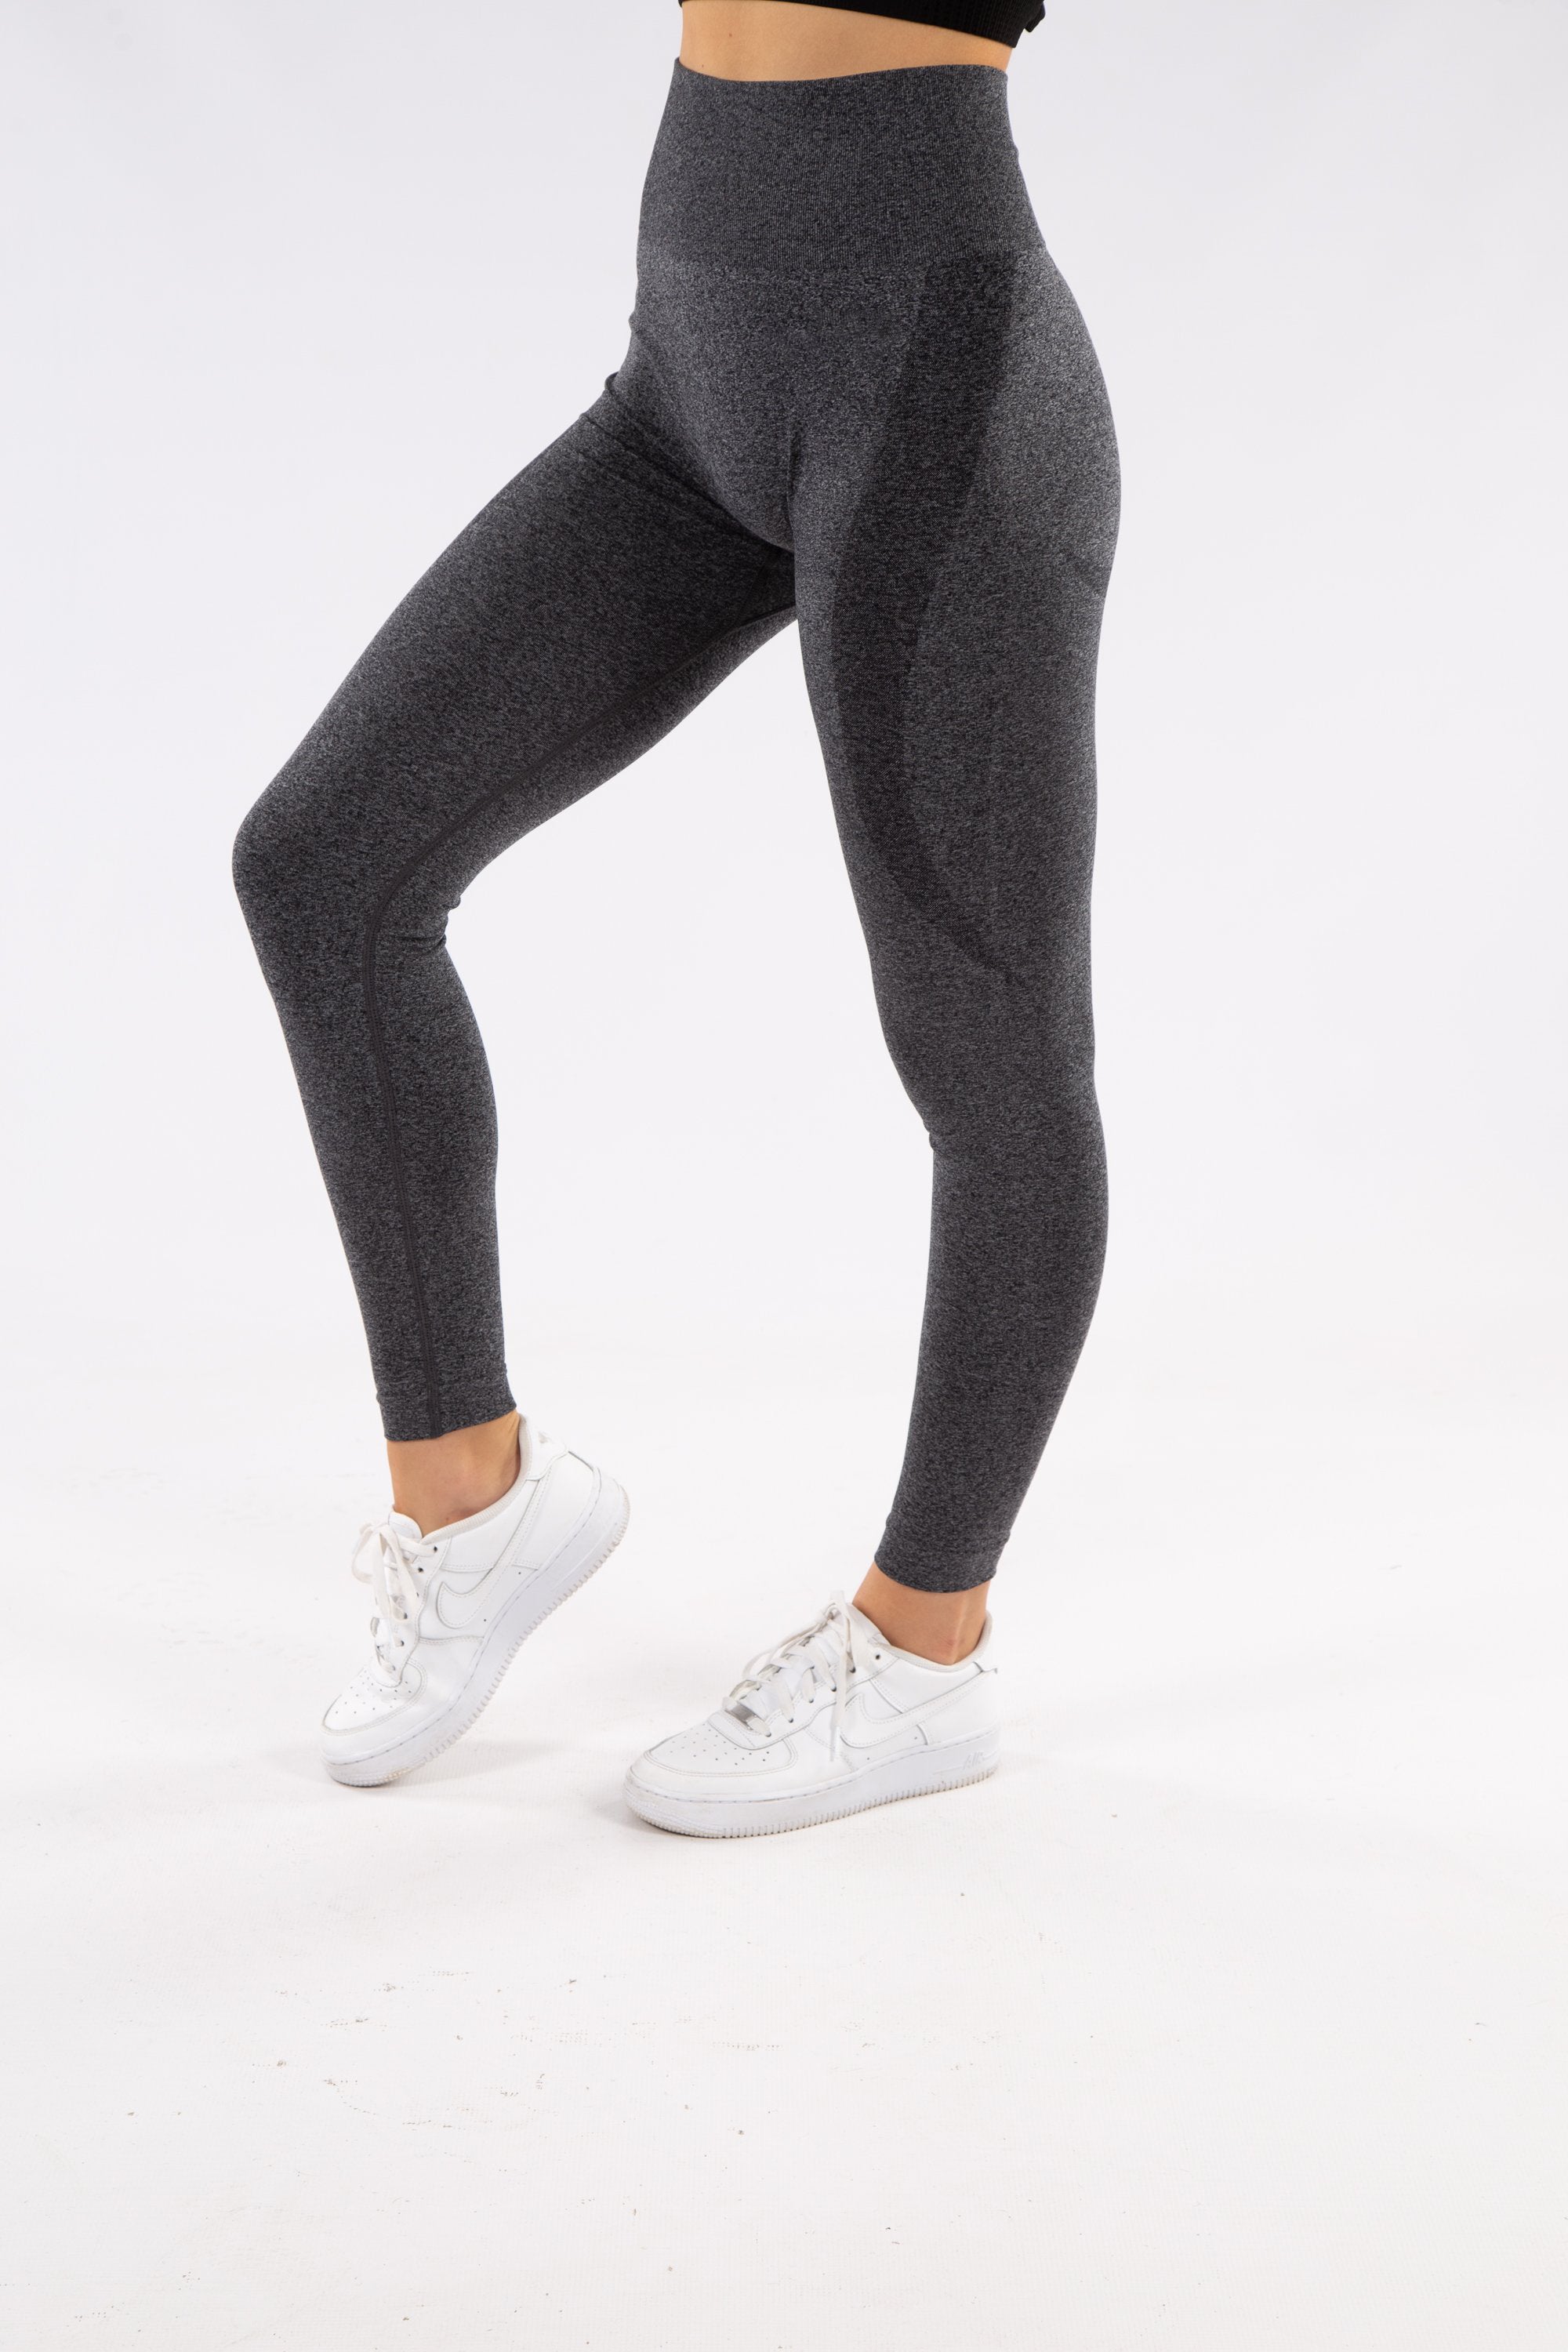 Seamless leggings have contour shadowing designed to enhance the beauty of  your natural curves. – Wonderfit Australia